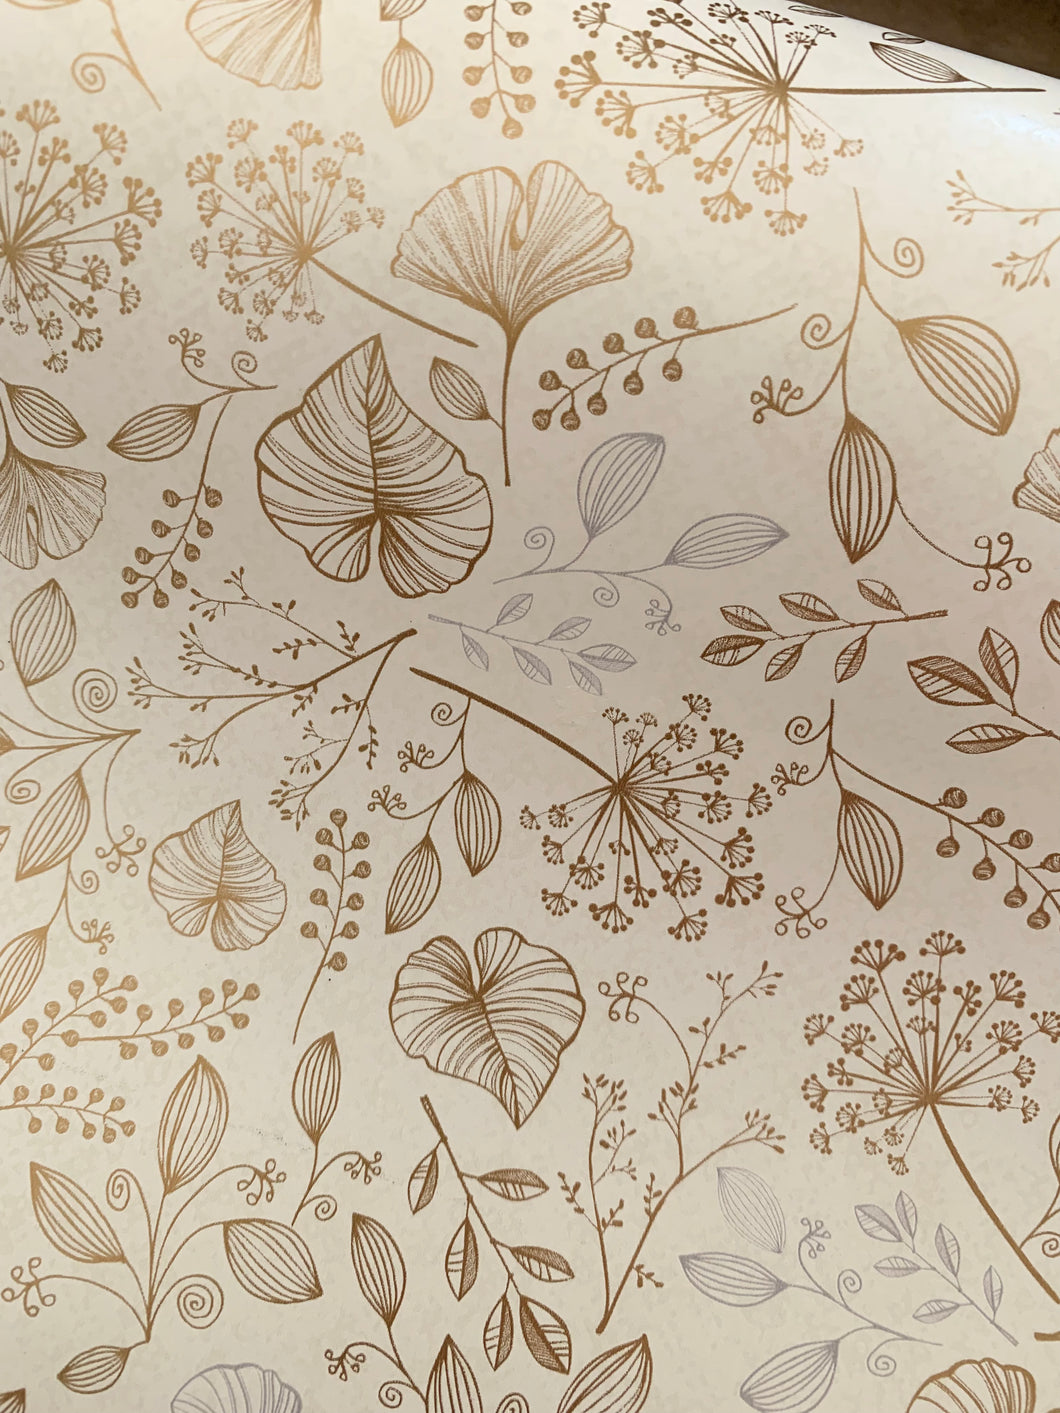 Gift wrapping paper - Botanical